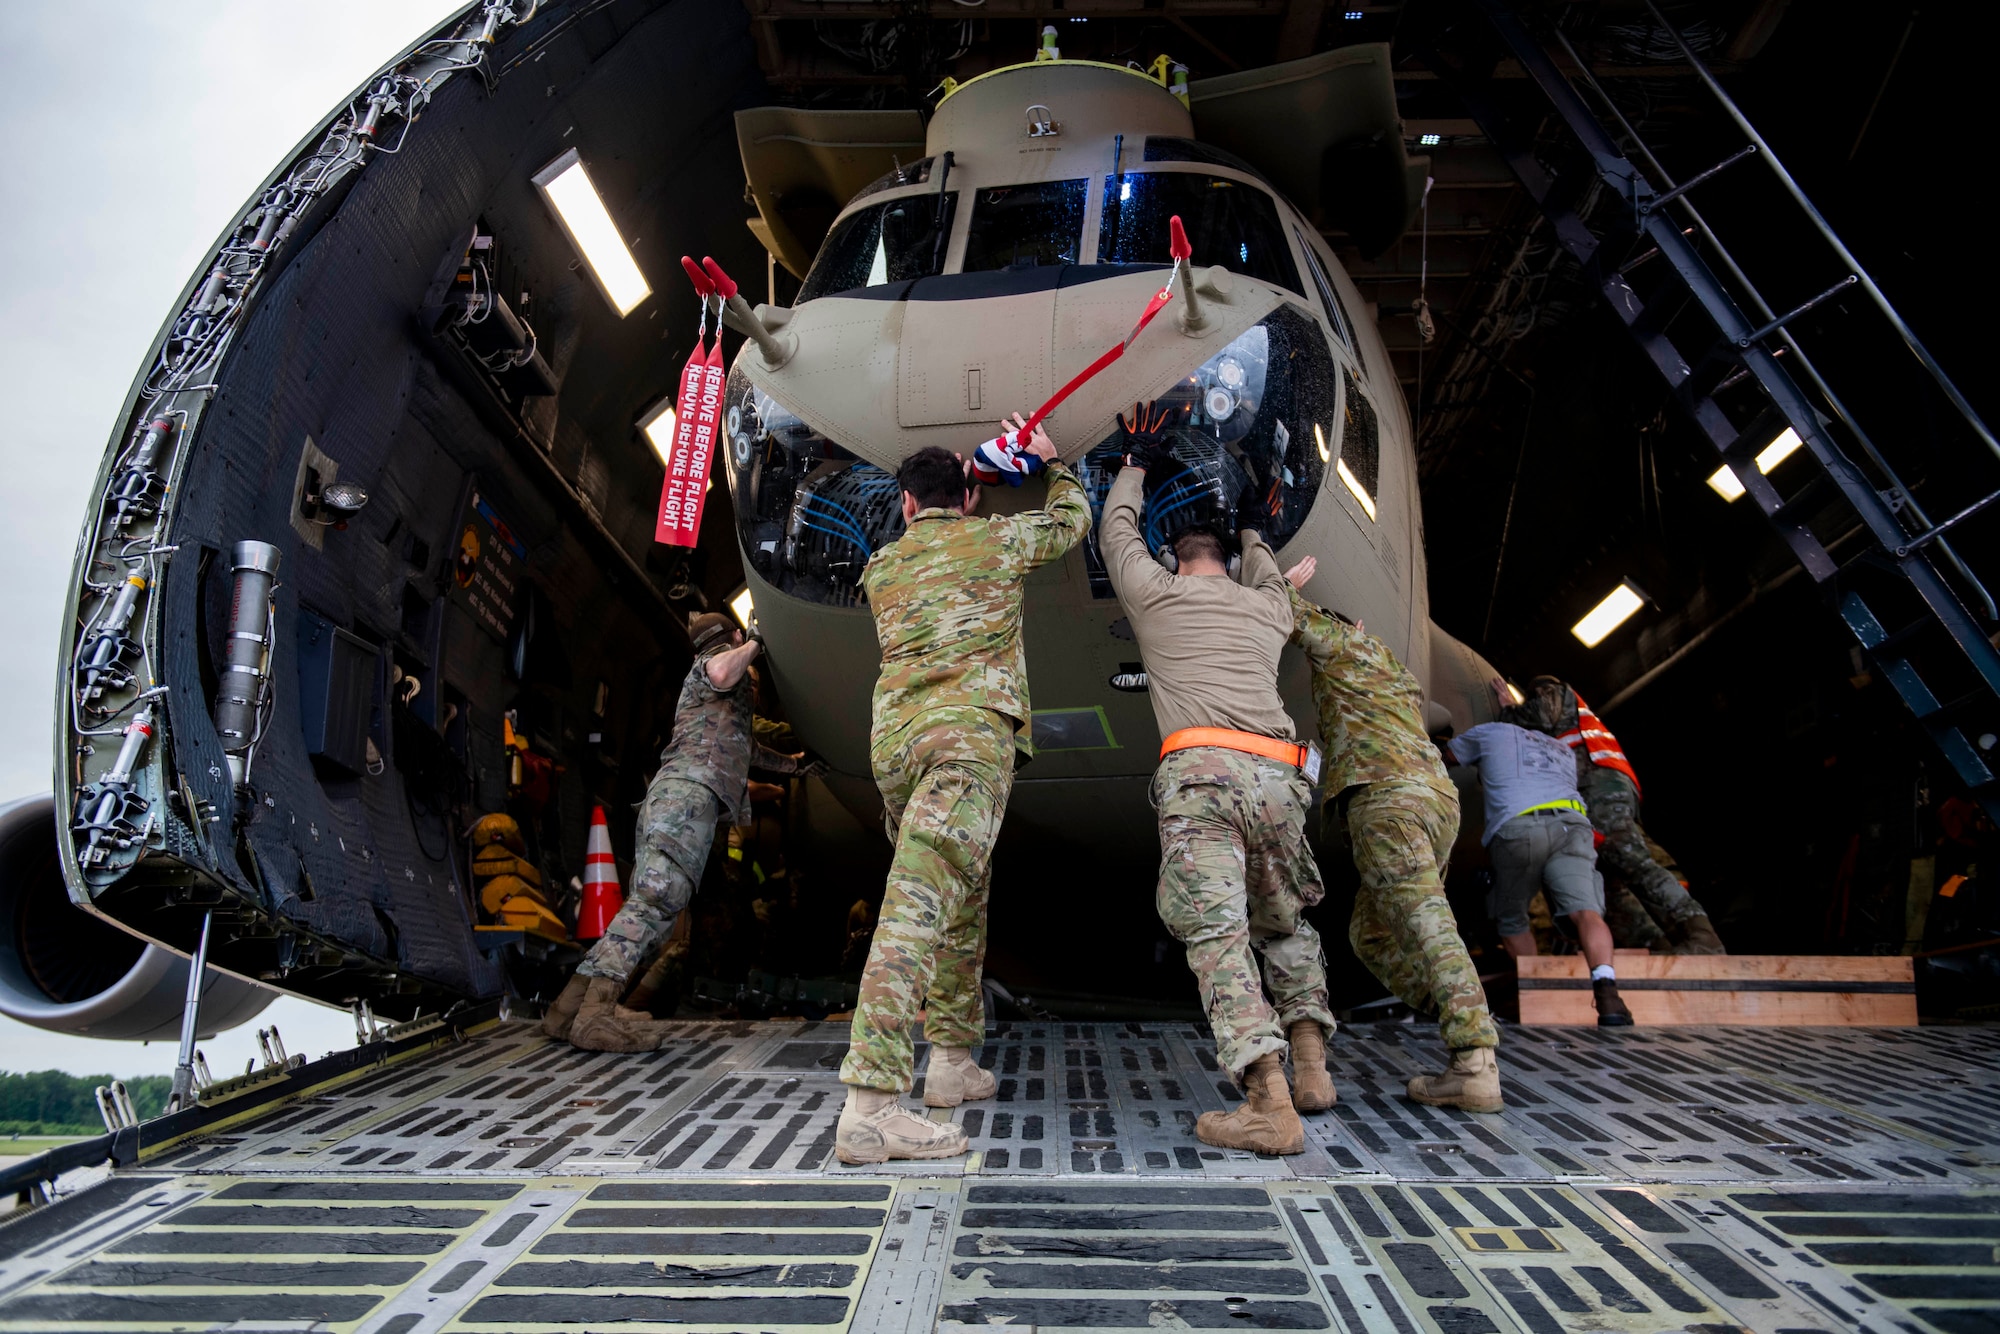 Australian Army soldiers and 436th Aerial Port Squadron ramp services personnel load a CH-47F Chinook helicopter onto a C-5M Super Galaxy during a foreign military sales mission at Dover Air Force Base, Delaware, June 16, 2022. The U.S. and Australia maintain a robust relationship that serves as an anchor for peace and stability in the Indo-Pacific region and around the world. Due to its strategic location, Dover AFB supports approximately $3.5 billion worth of foreign military sales annually. (U.S. Air Force photo by Tech. Sgt. J.D. Strong II)